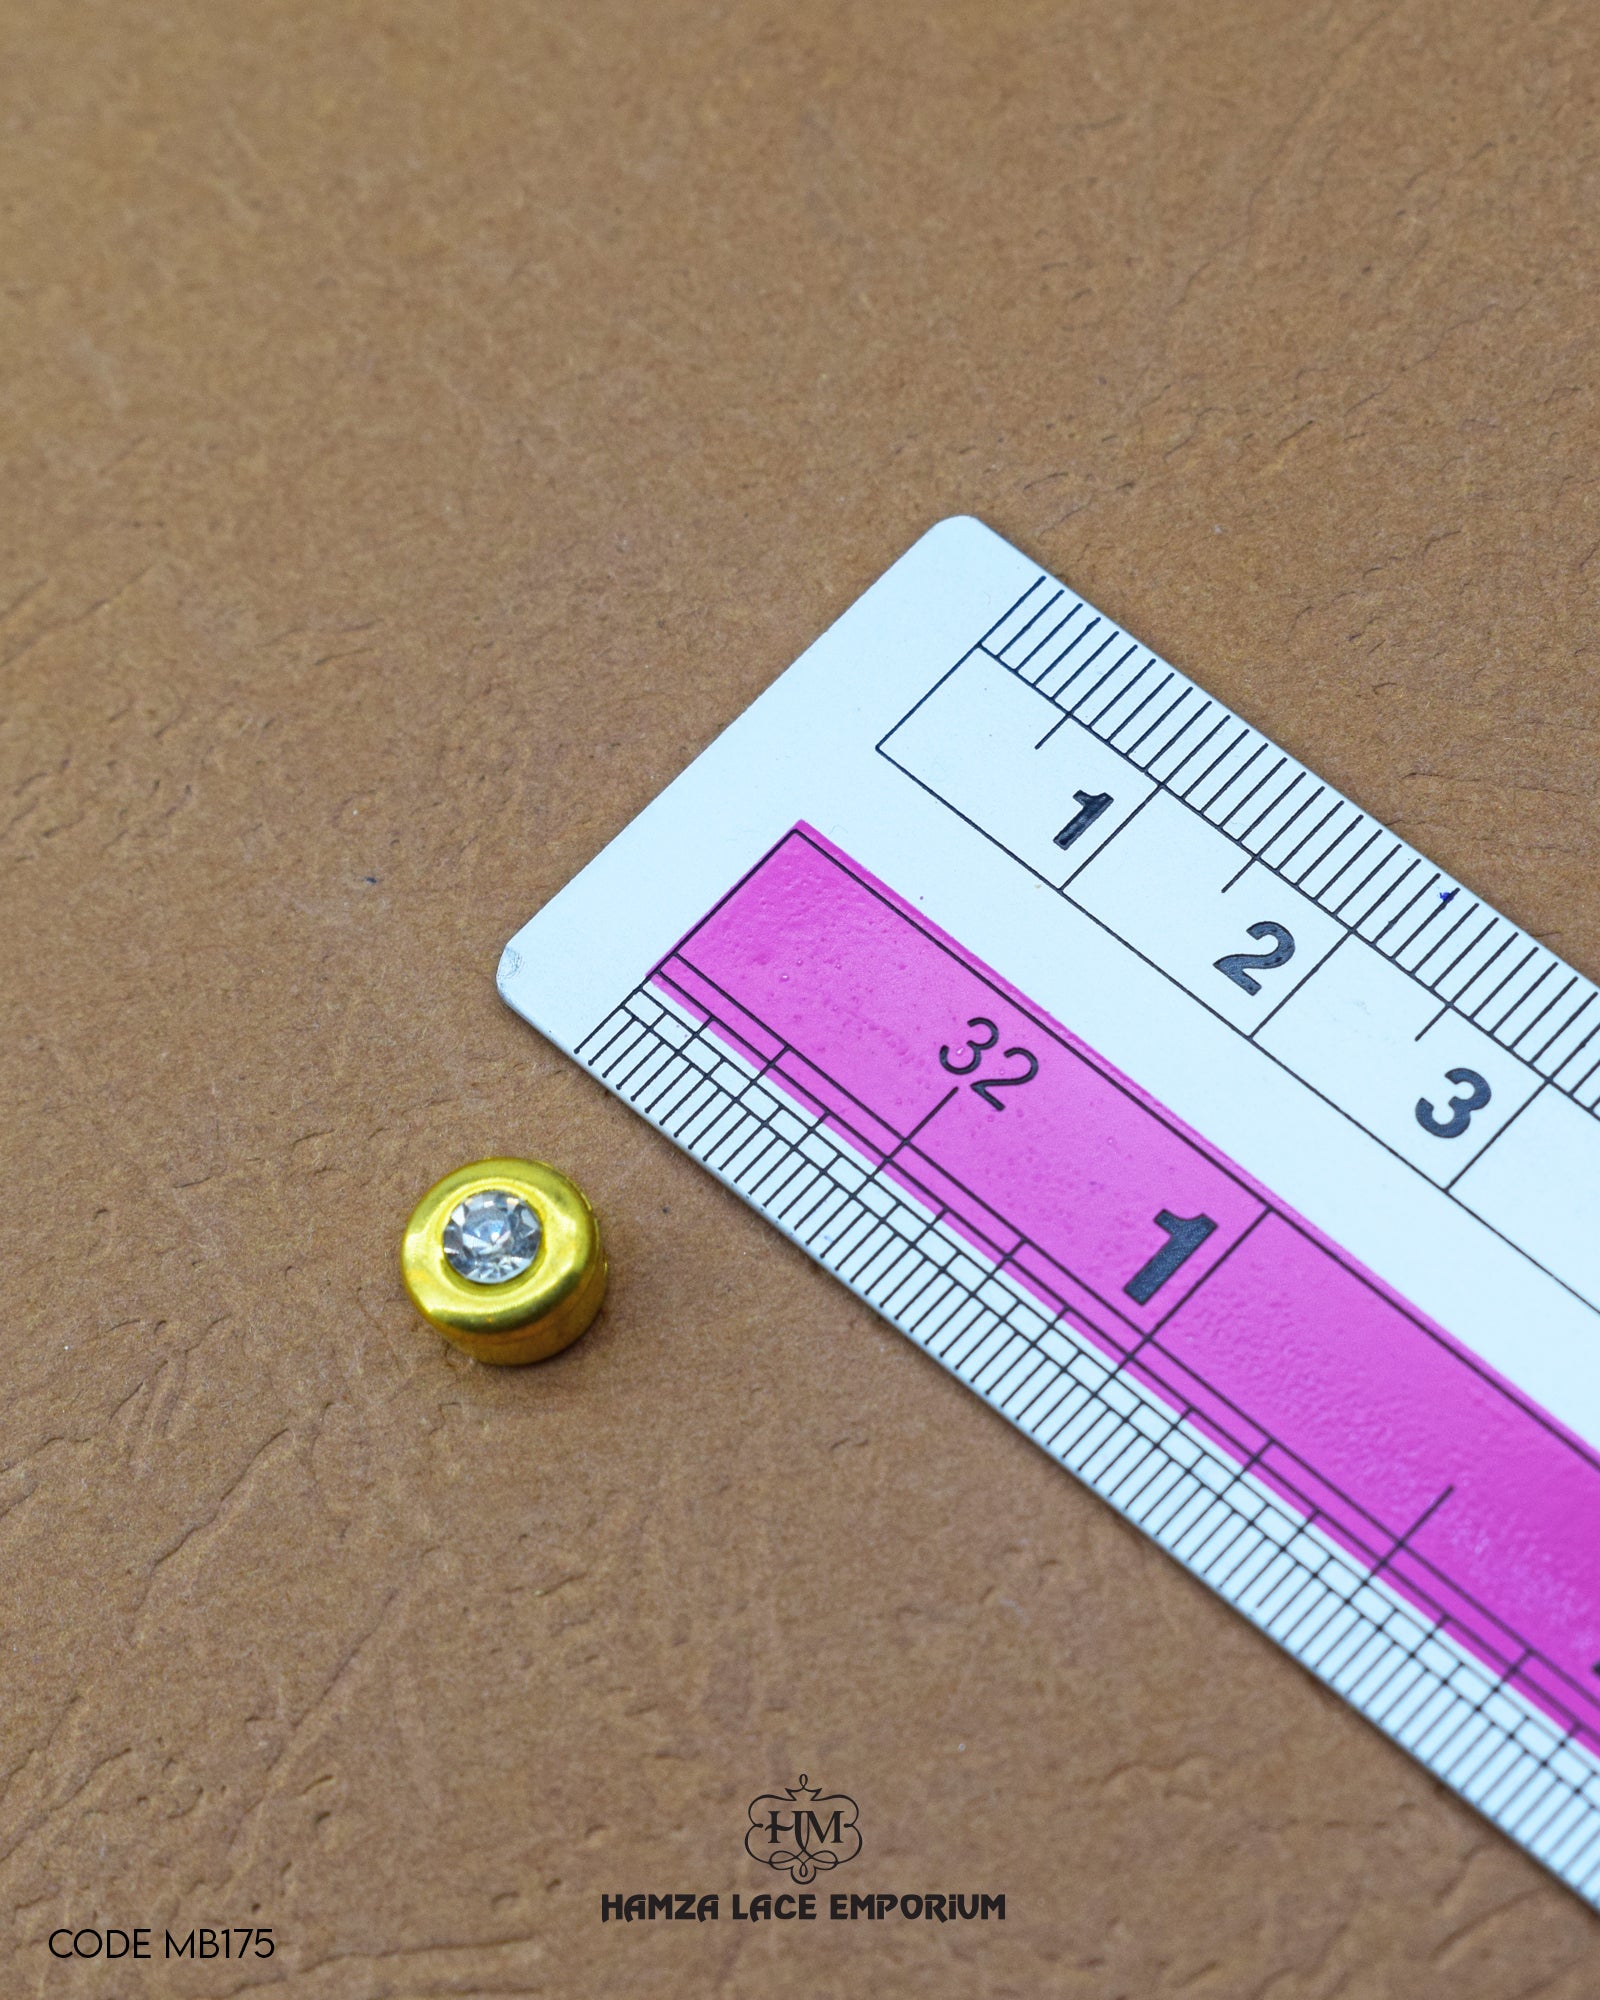 The size of the 'Metal Stone Button MB175' is measured using a ruler.